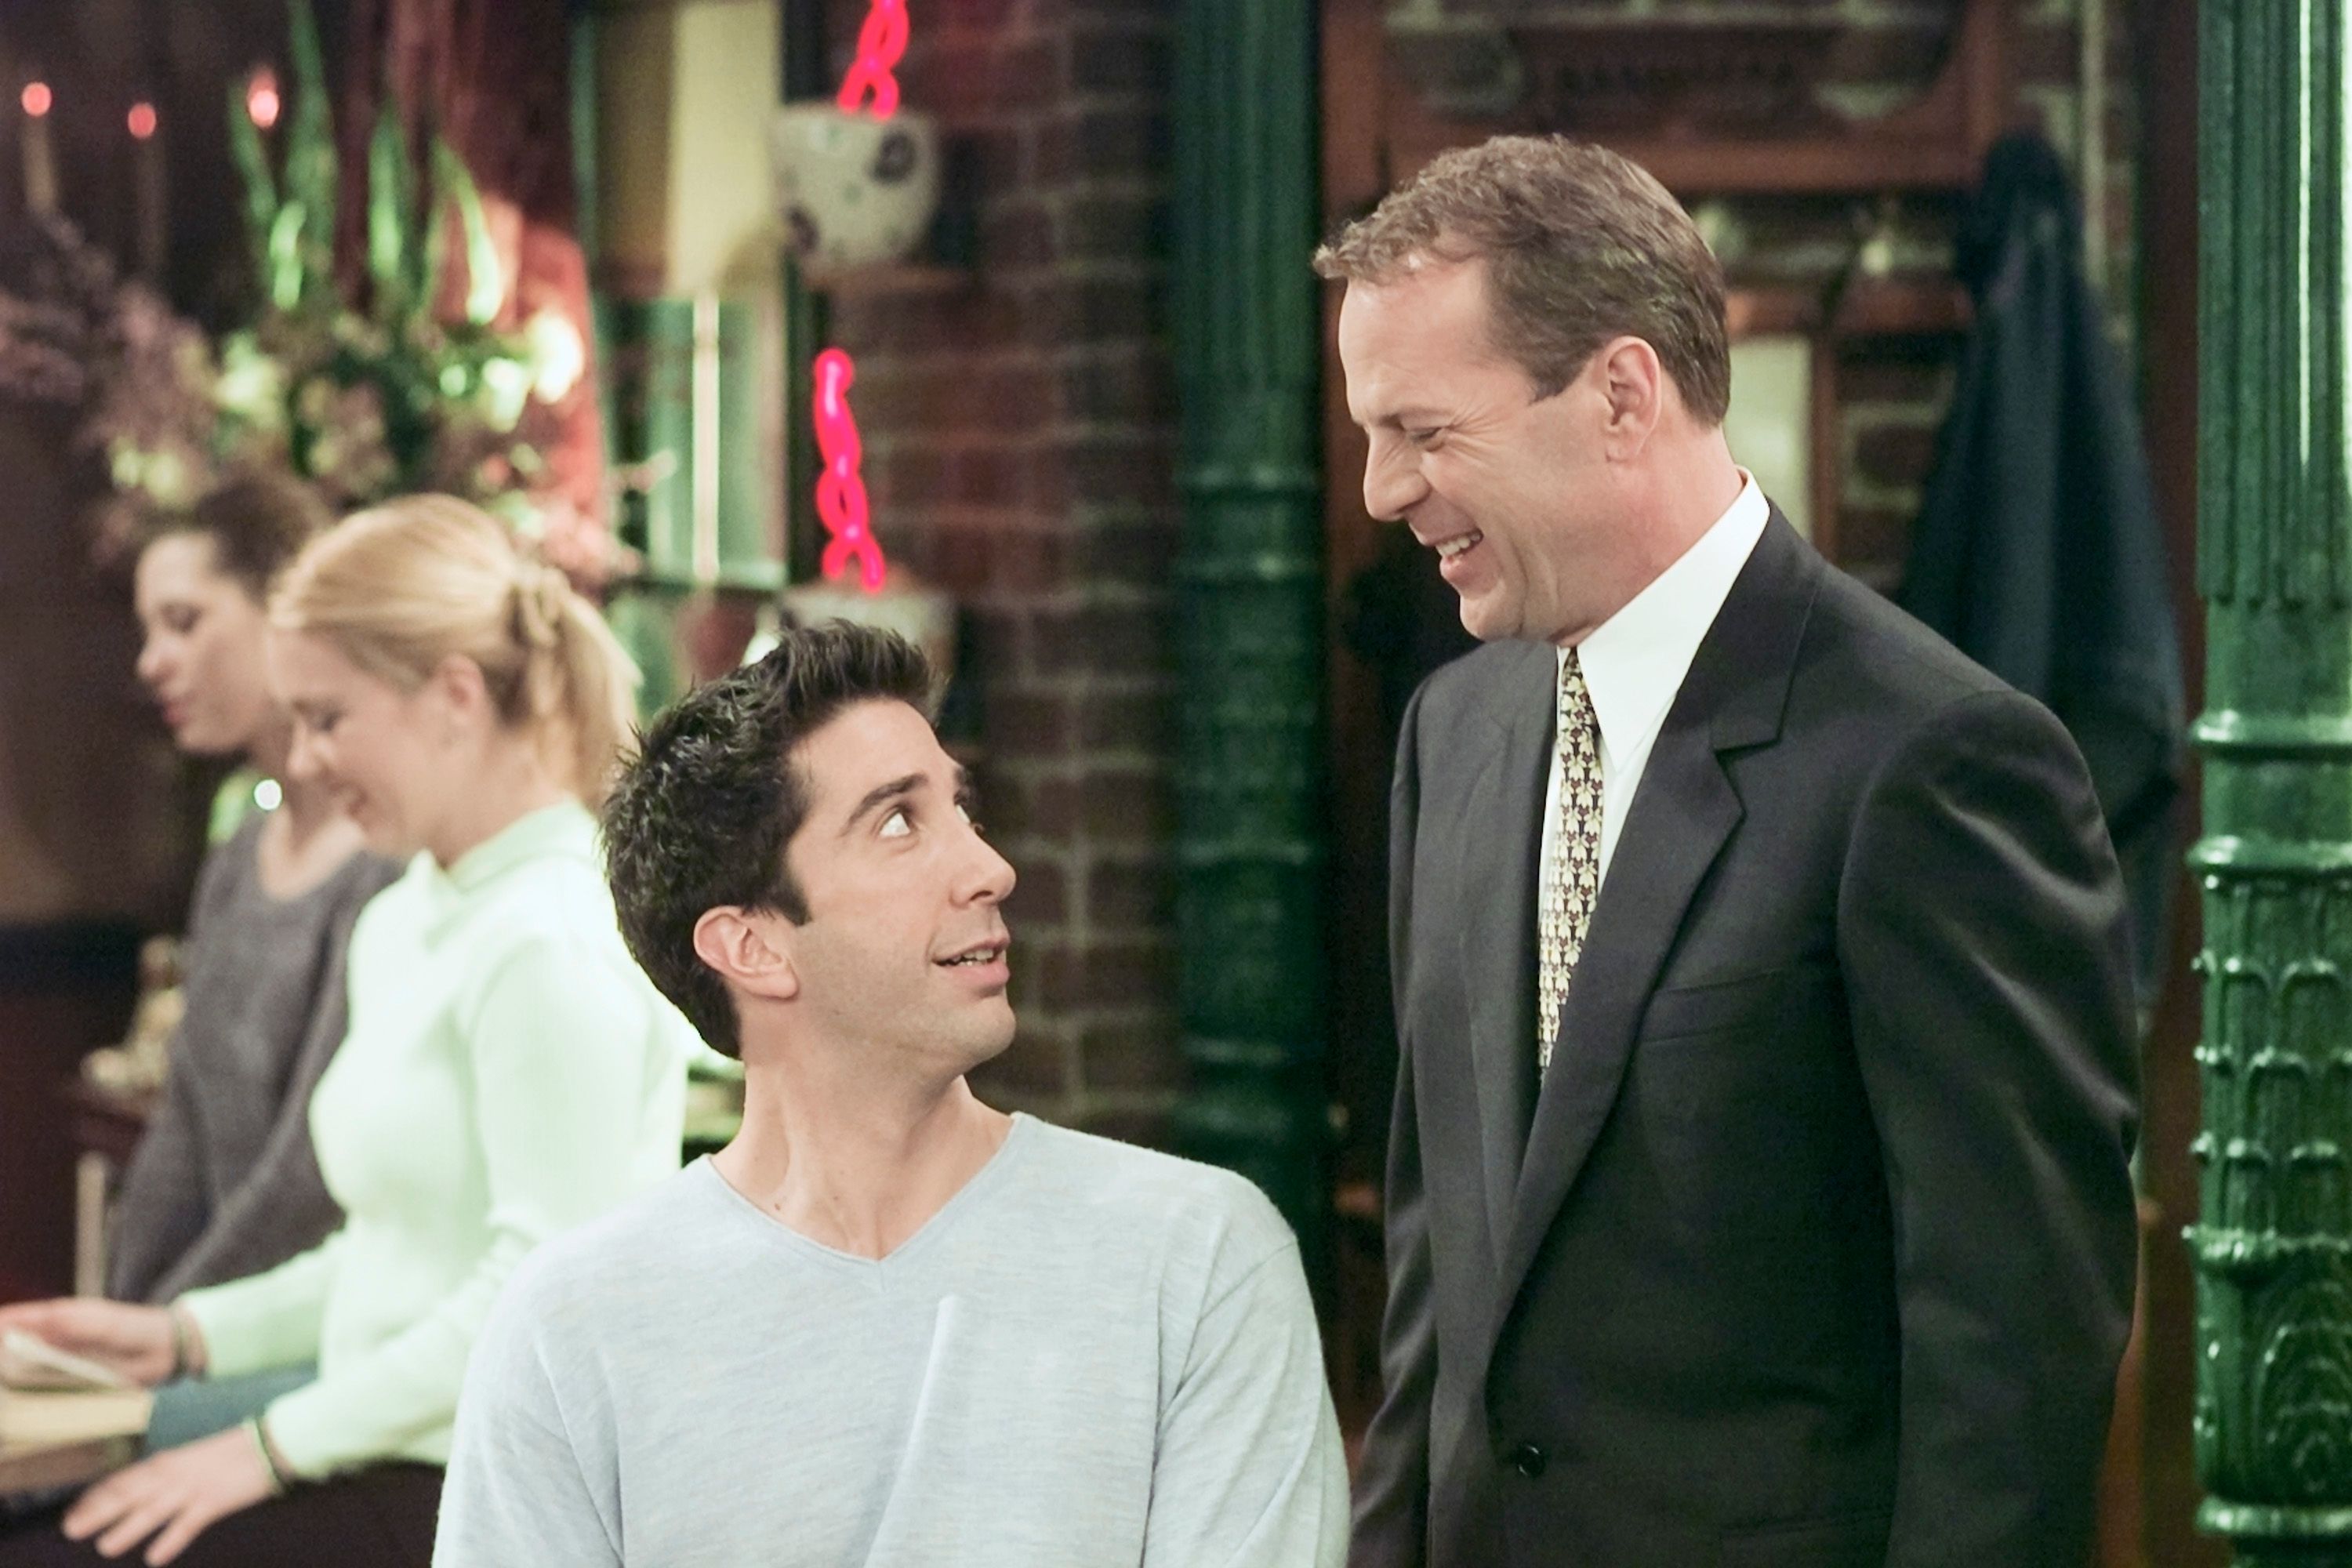  David Schwimmer as Ross Geller, and Bruce Willis as Paul Stevens in a 2000 episode of "Friends" | Source: Getty Images